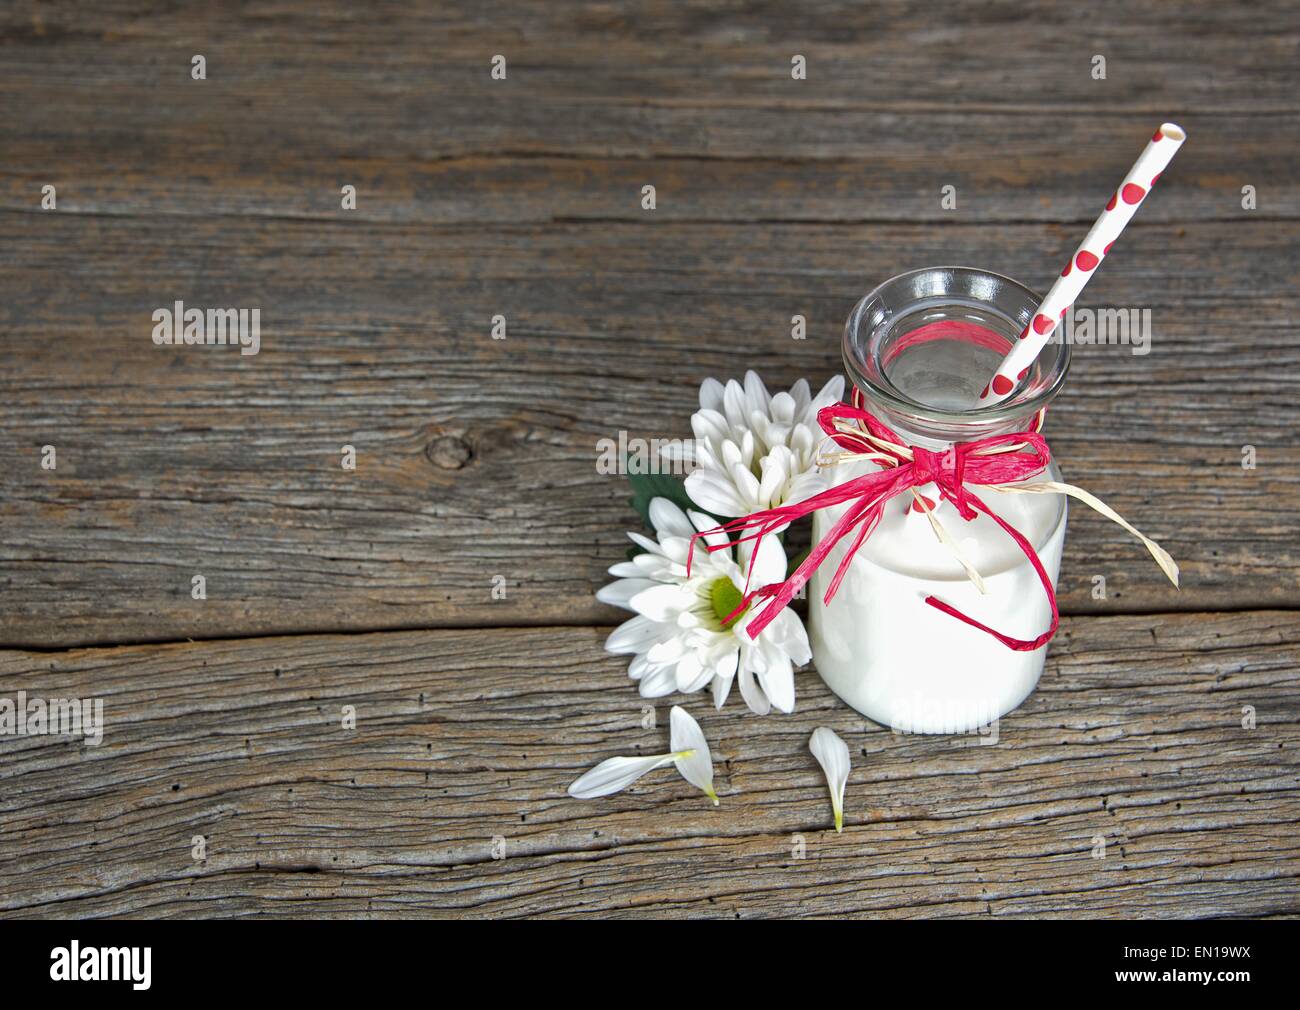 White milk in a retro glass bottle with polka dot straw and daisies on rustic wood. Stock Photo